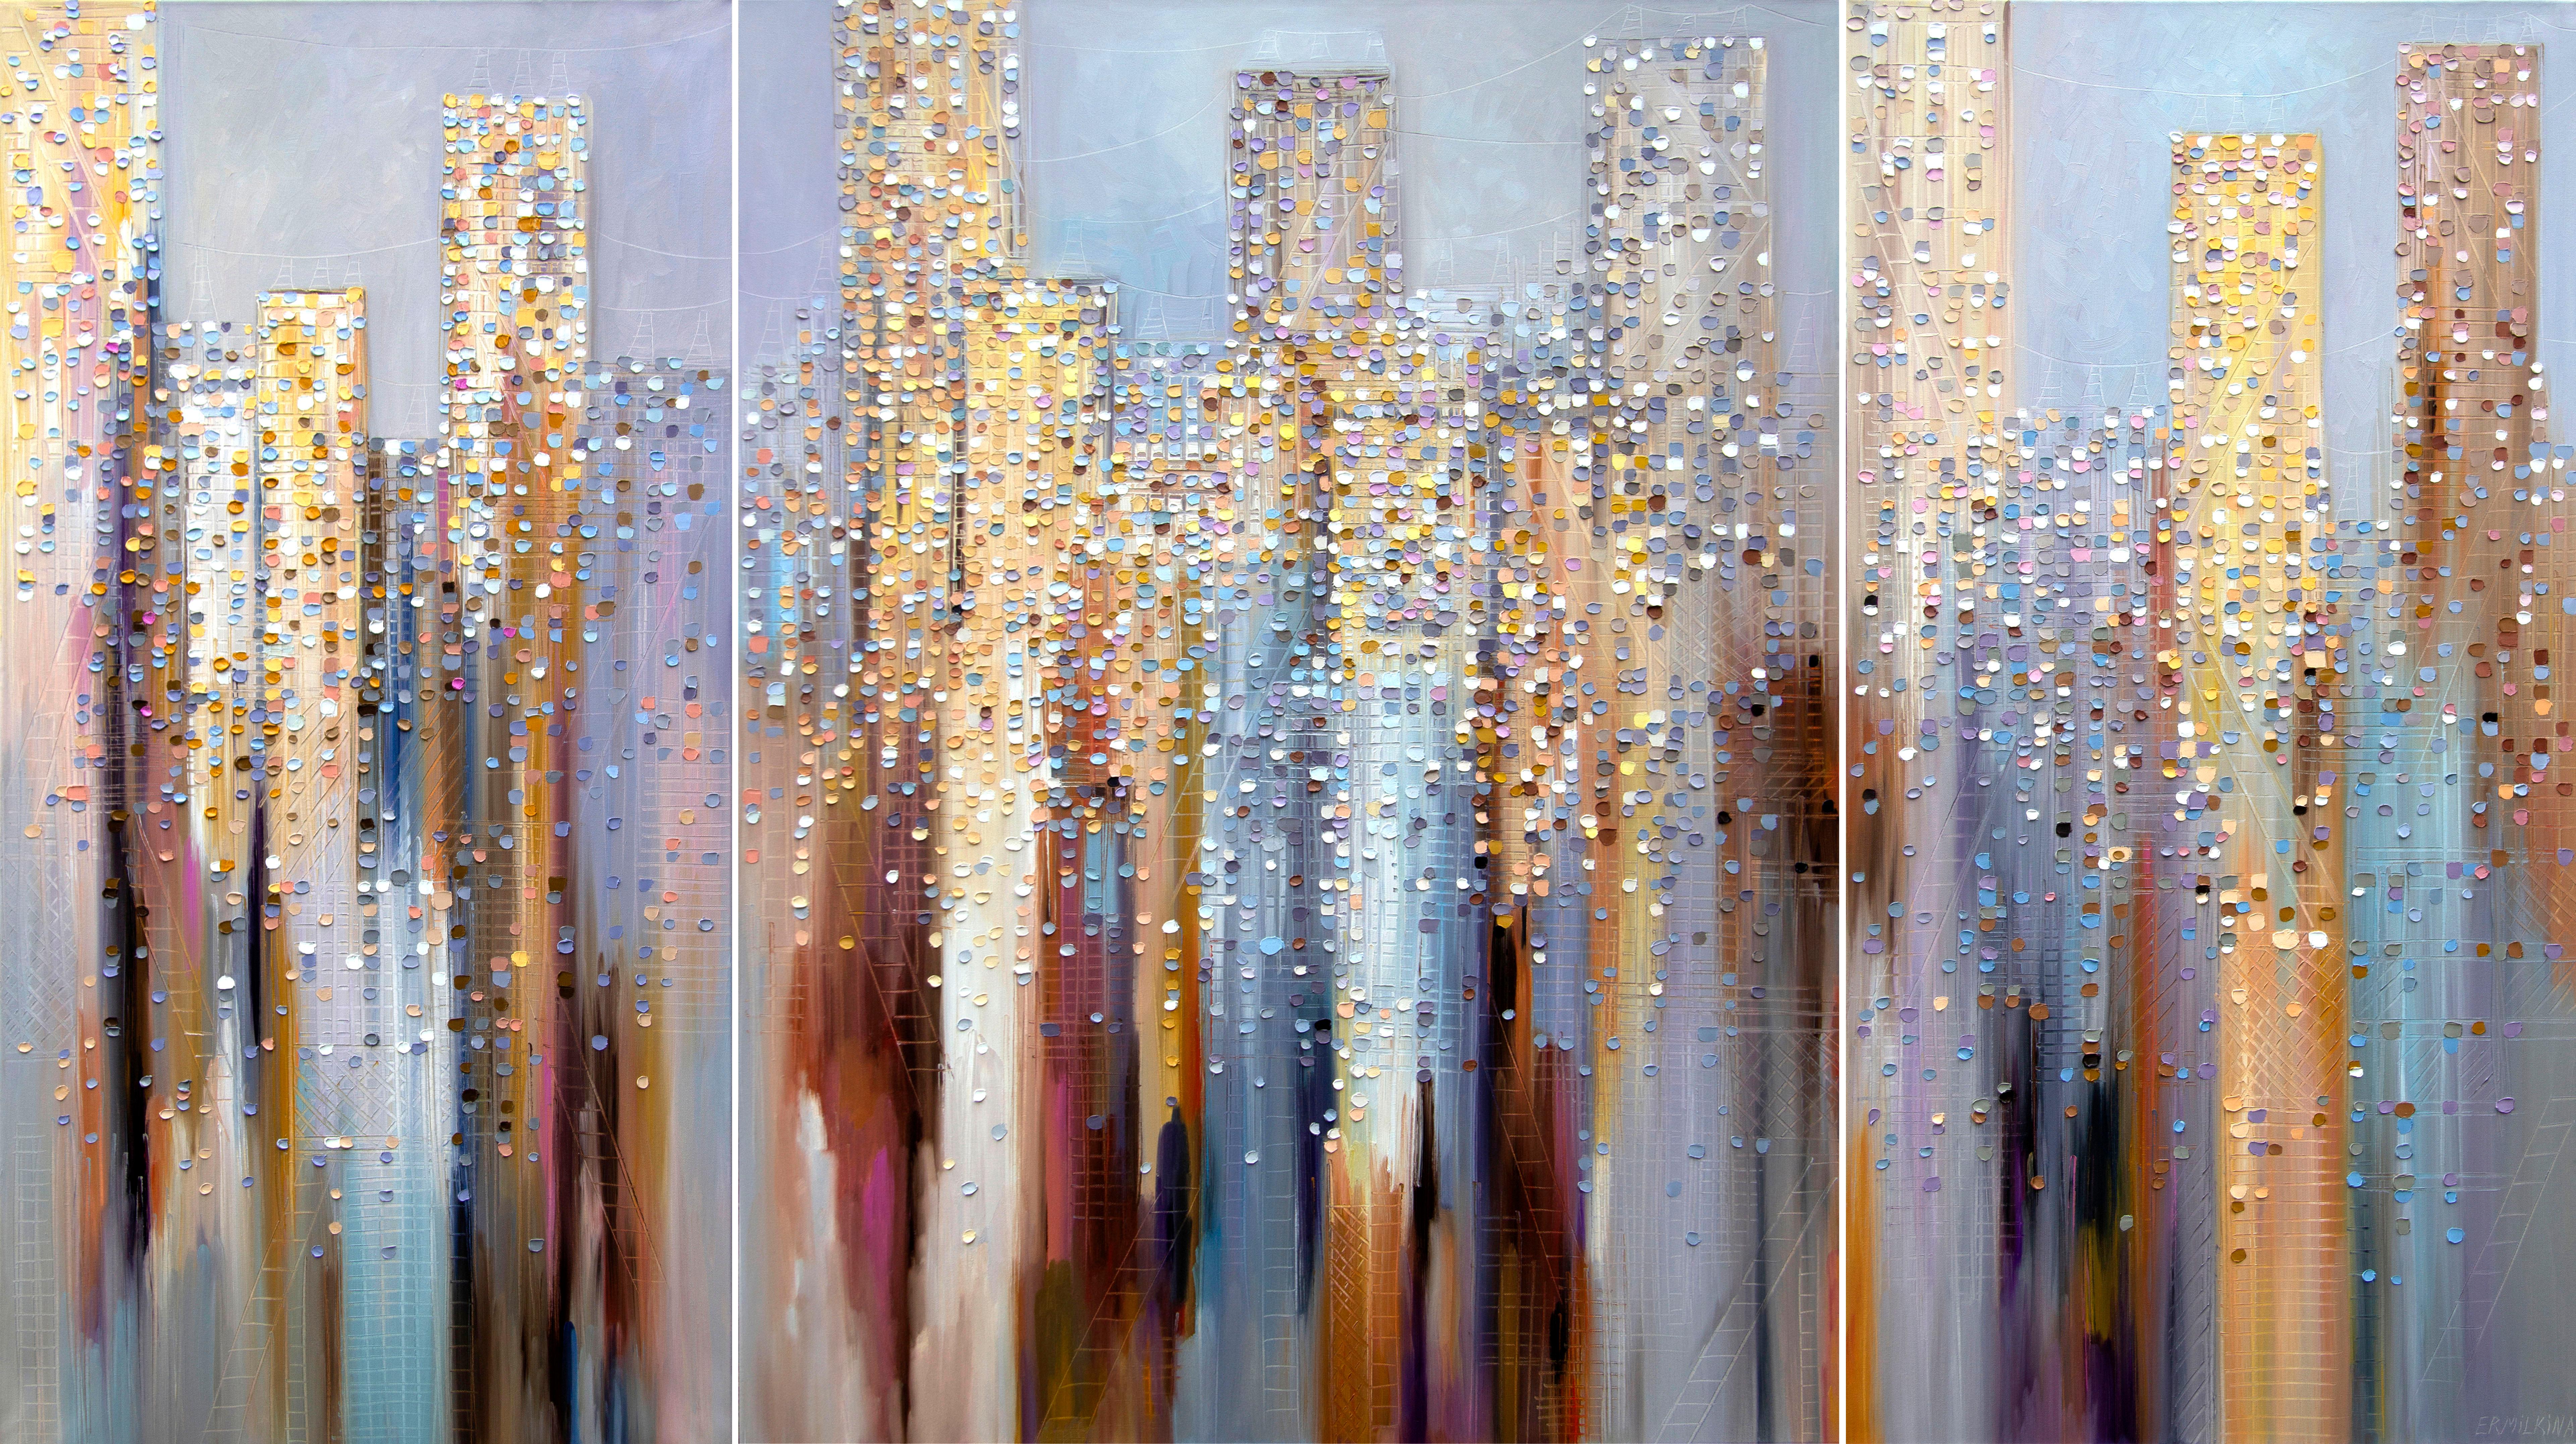 Ekaterina Ermilkina Abstract Painting - City In The Clouds (Triptych)  - Original Textural Oil Painting on Canvas